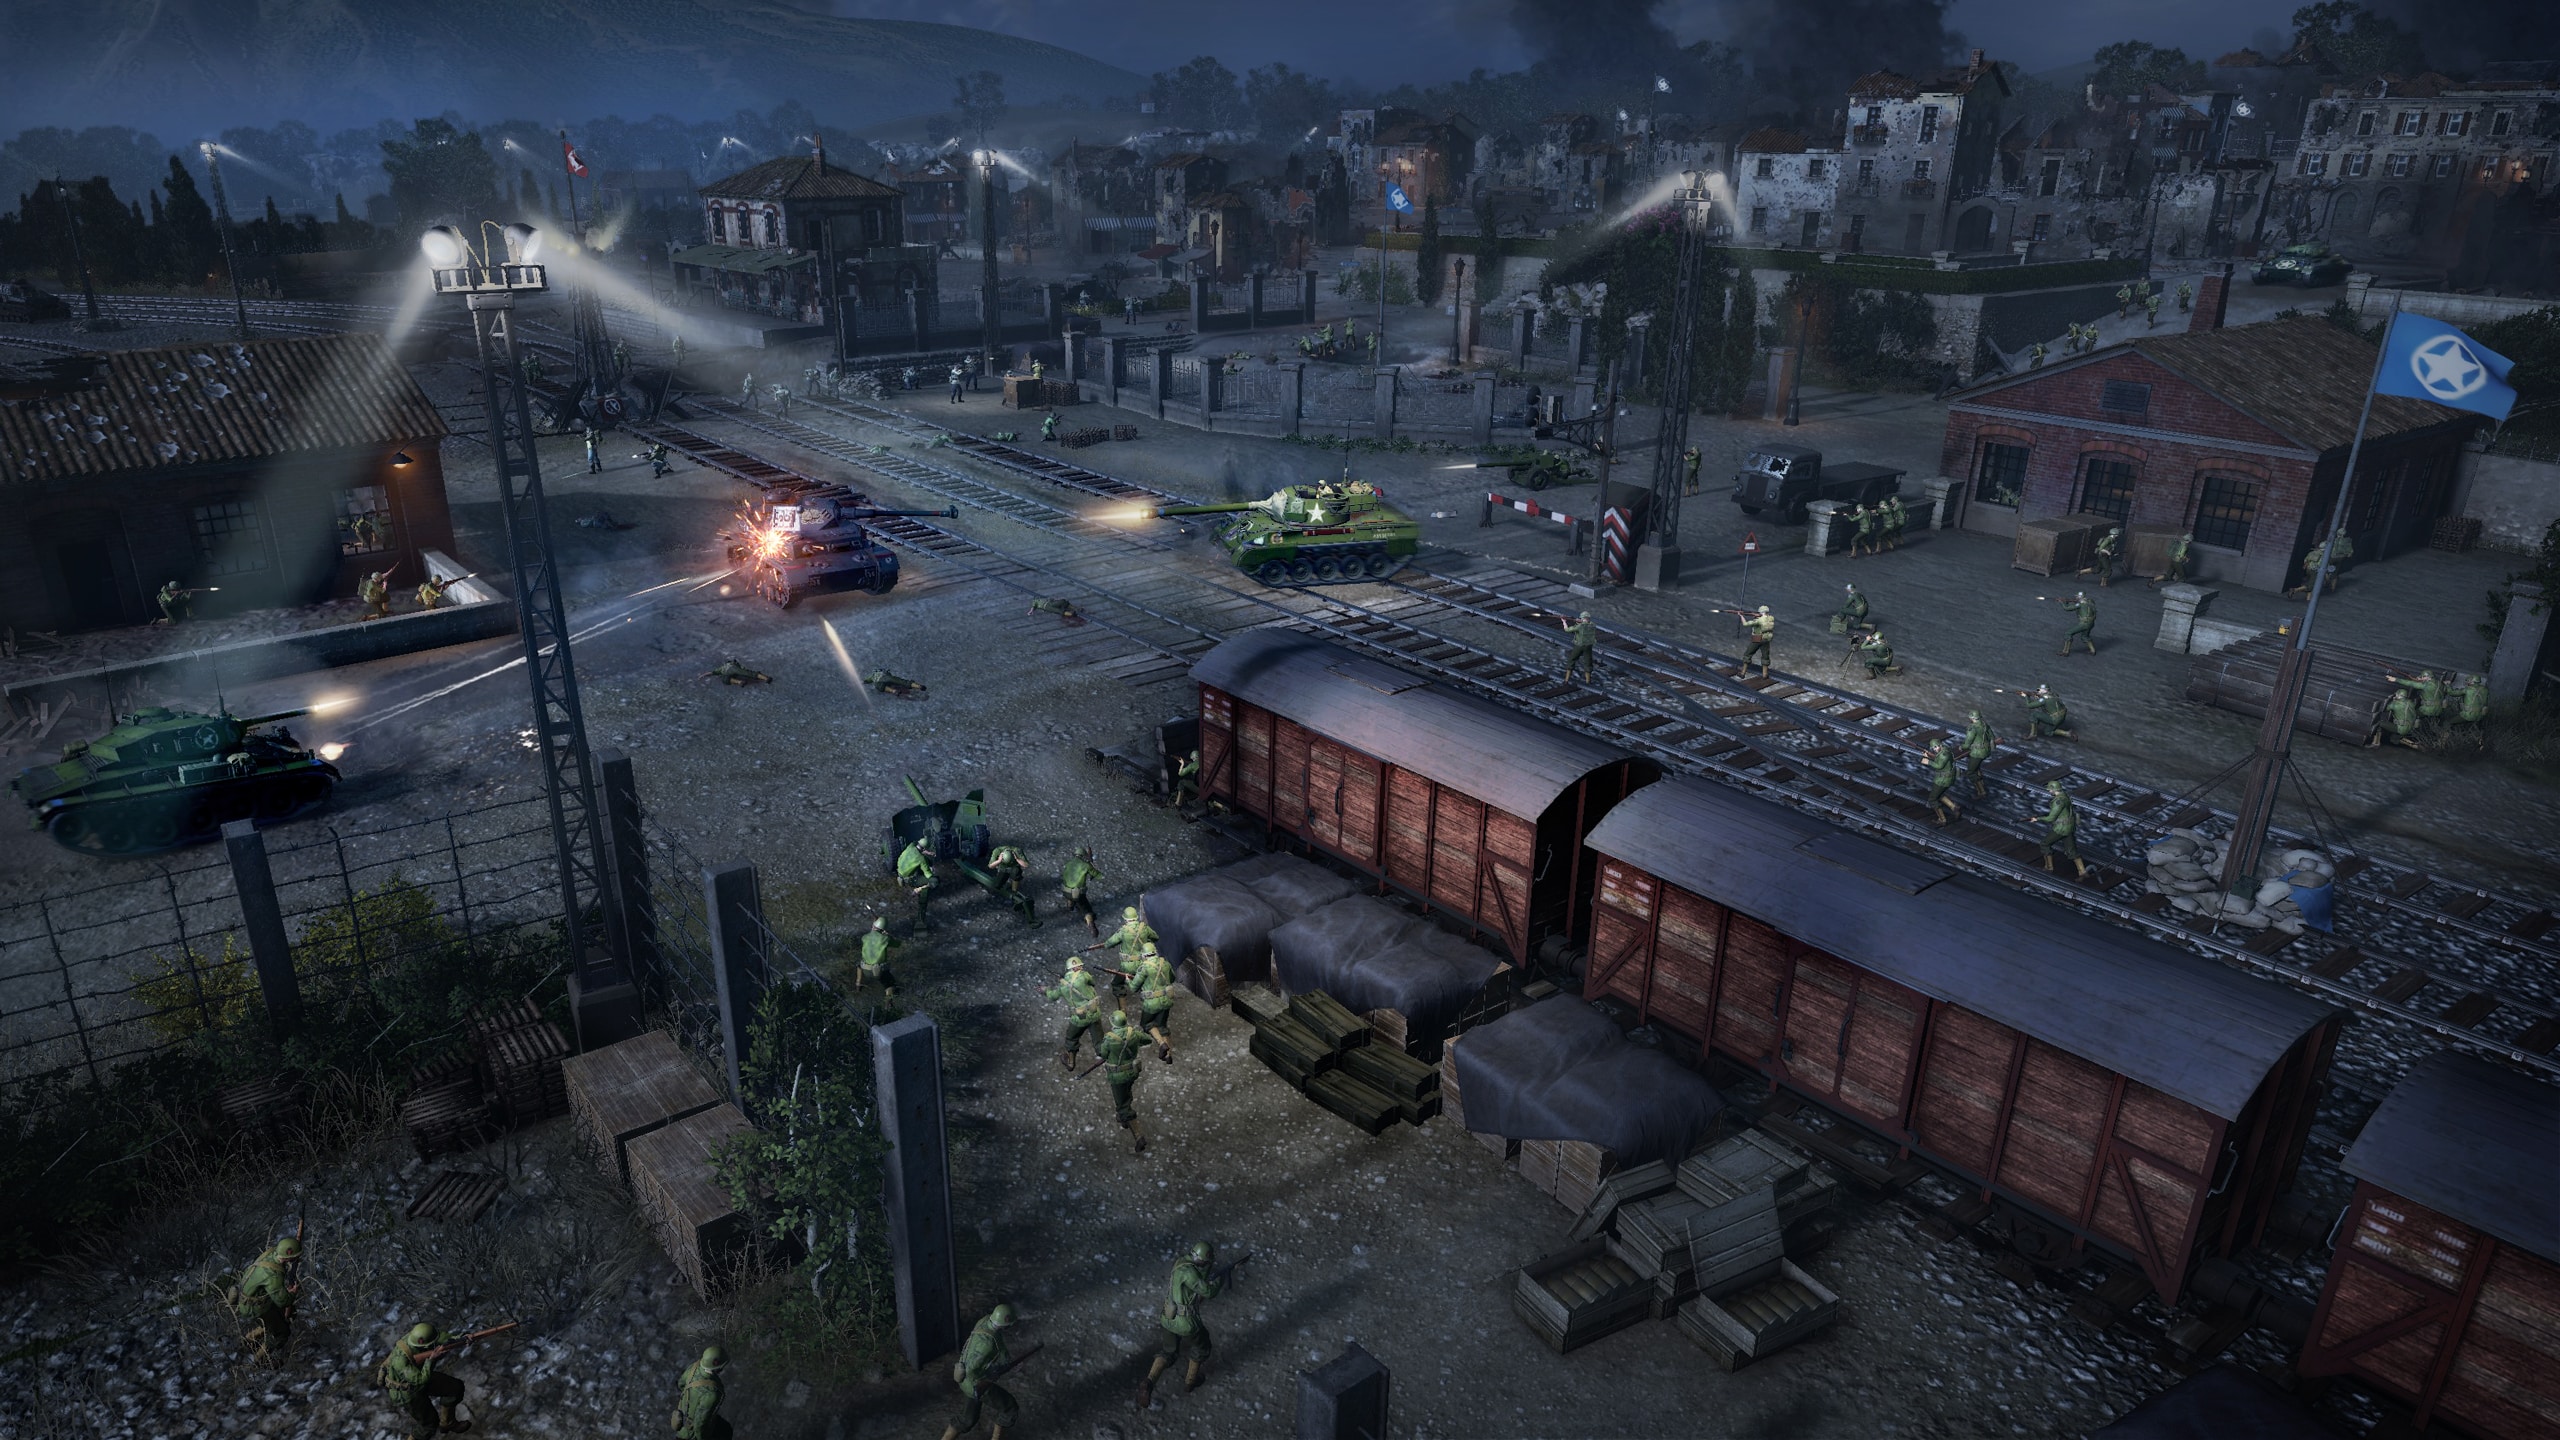 Company of Heroes 3 Hands On - Impressions GamersRD 15456